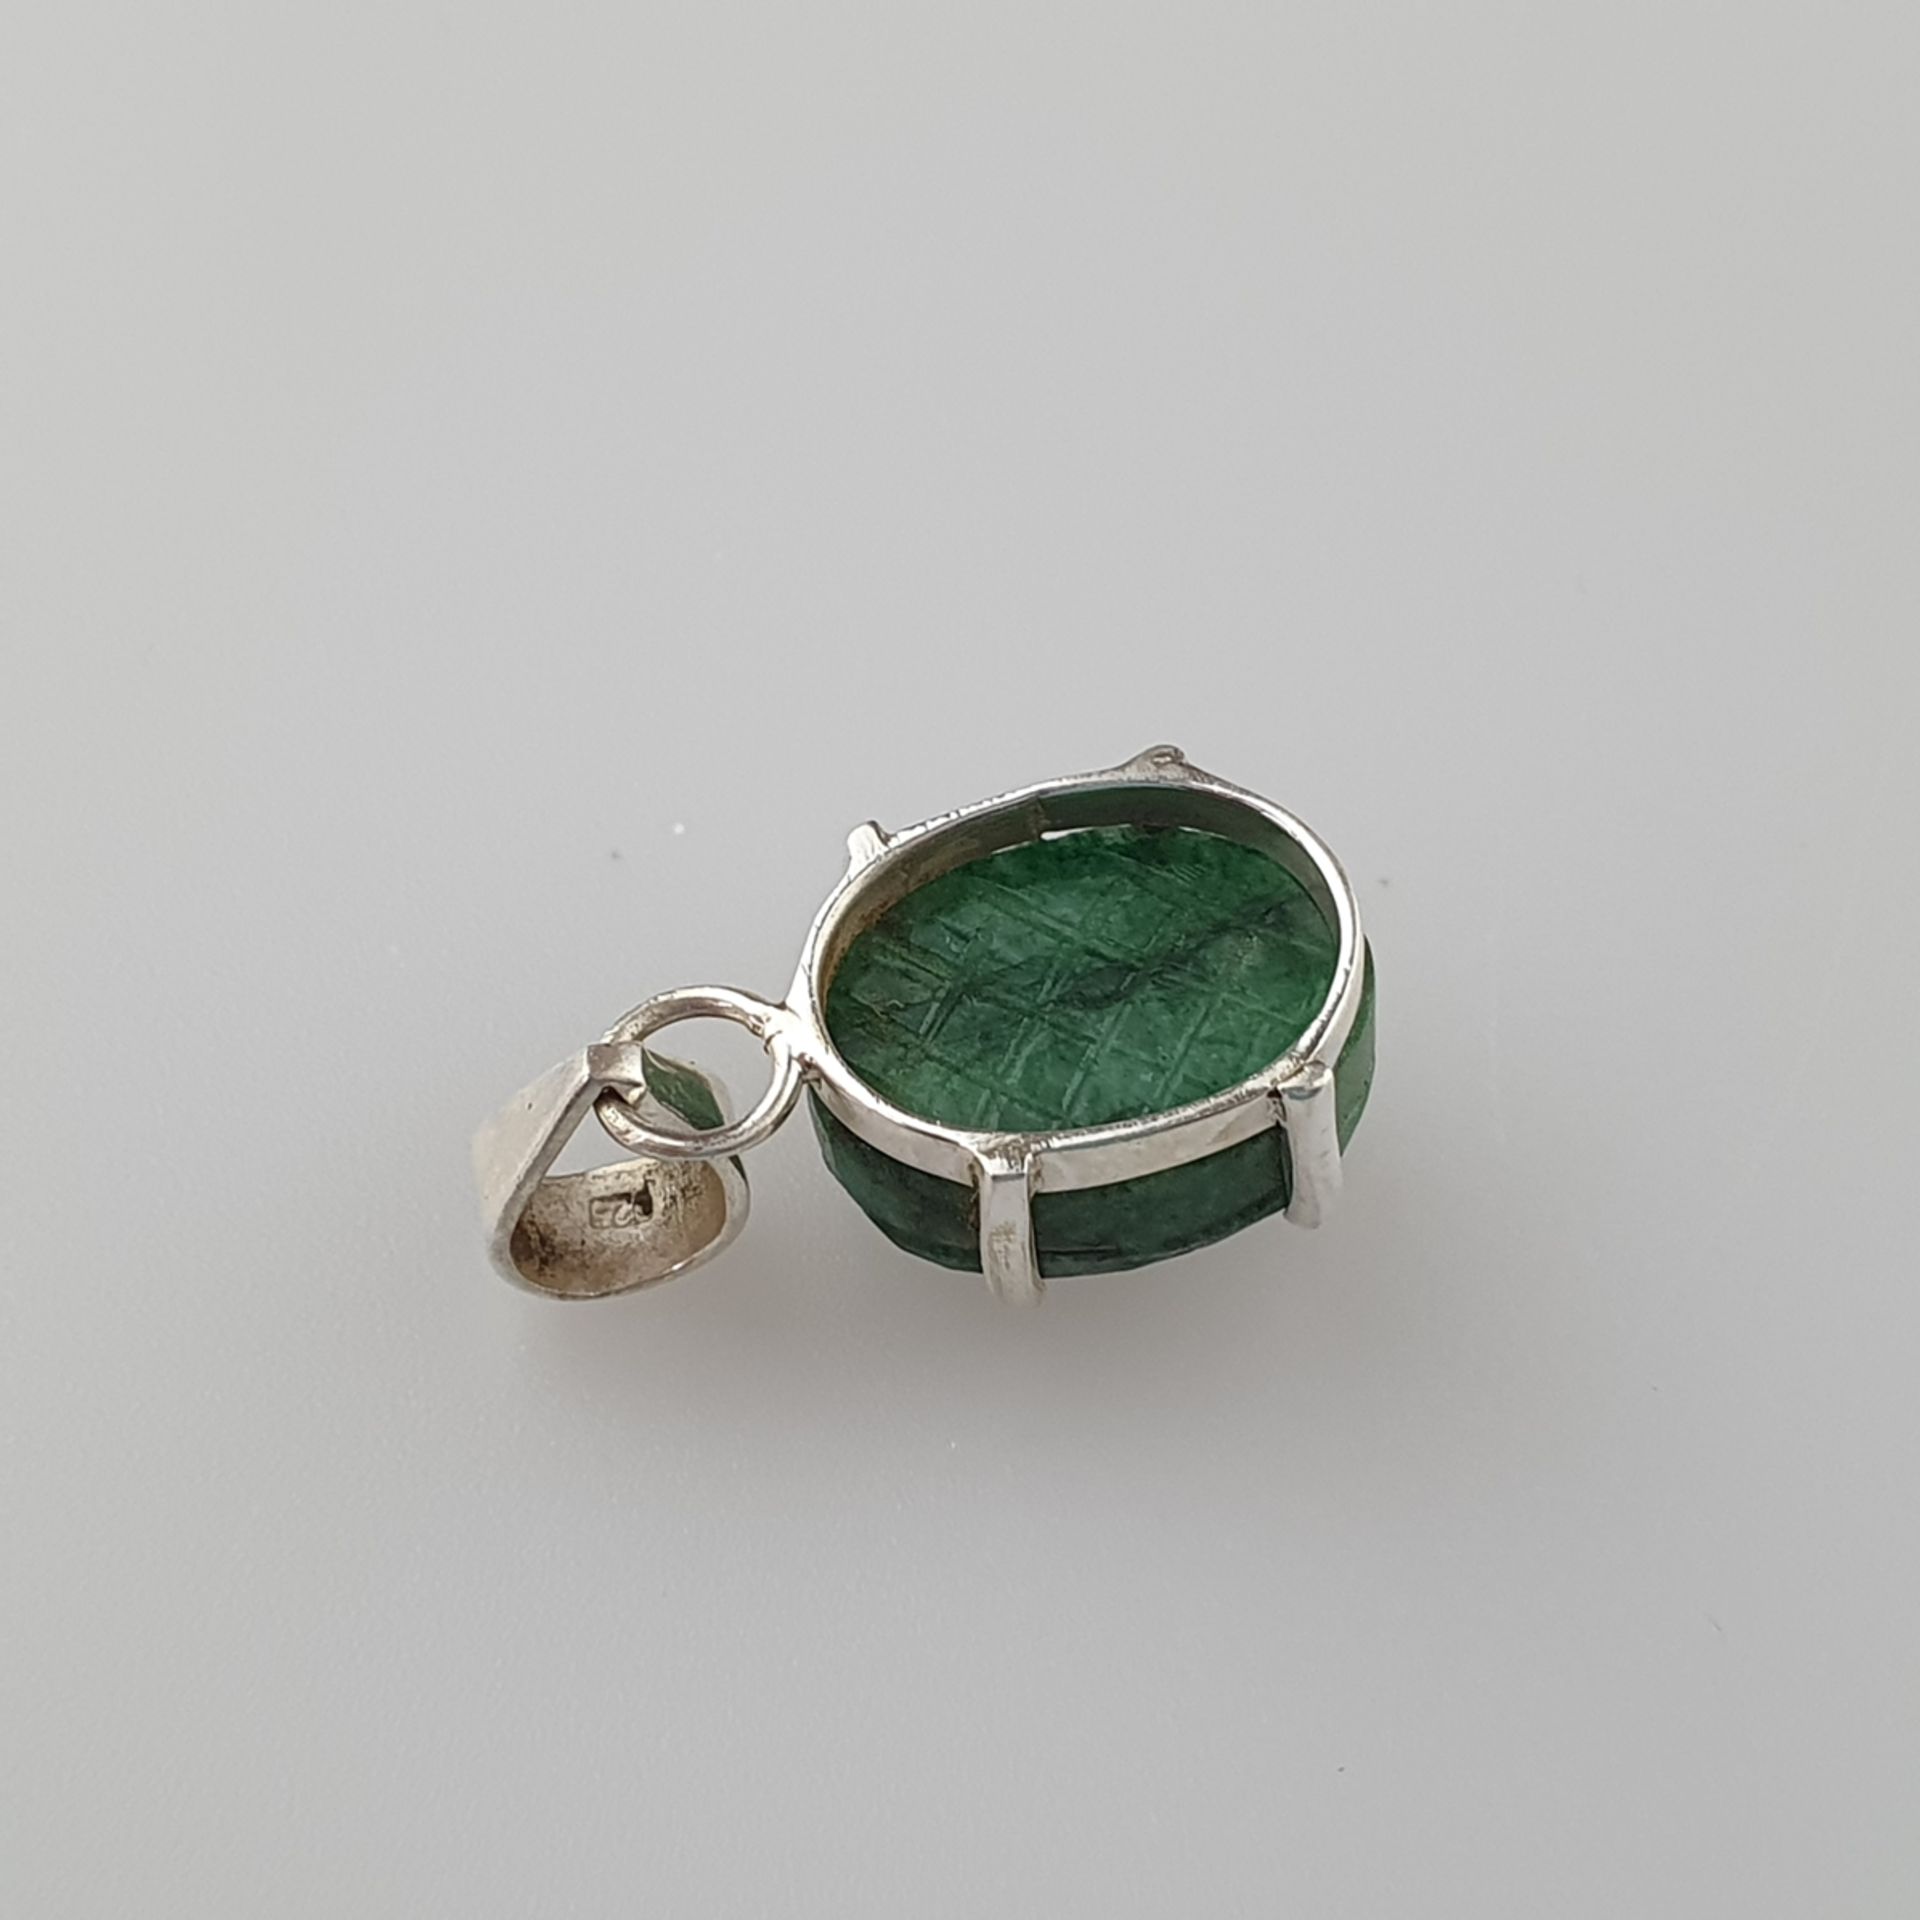 925 Silver Pendant with a Carved Emerald of 14ct, ca. 5,0g, total measurements: ca. 22 x 12,5 mm - Image 4 of 4